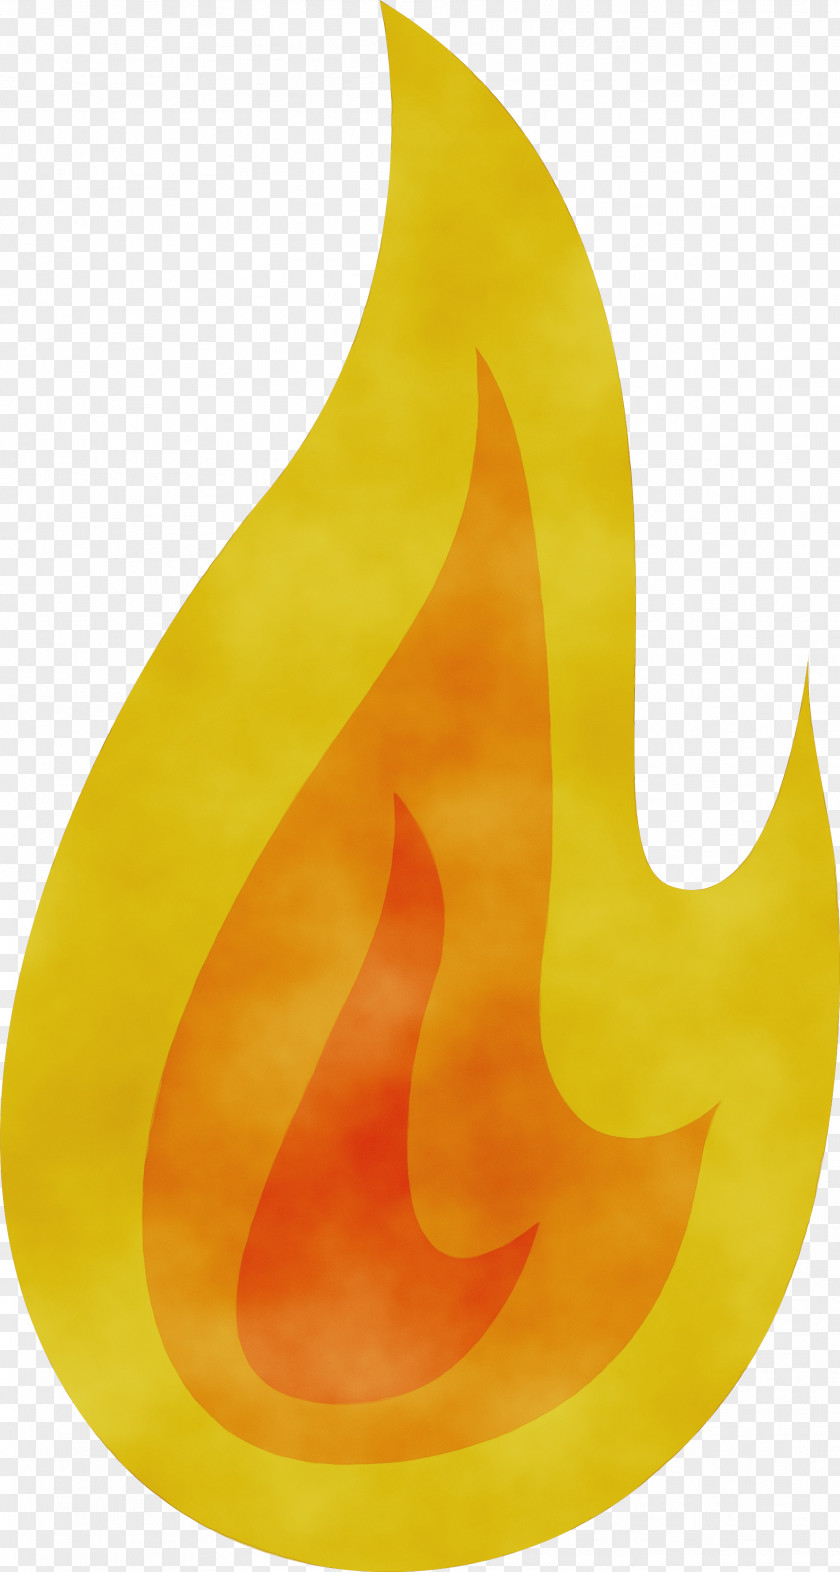 Flame PNG